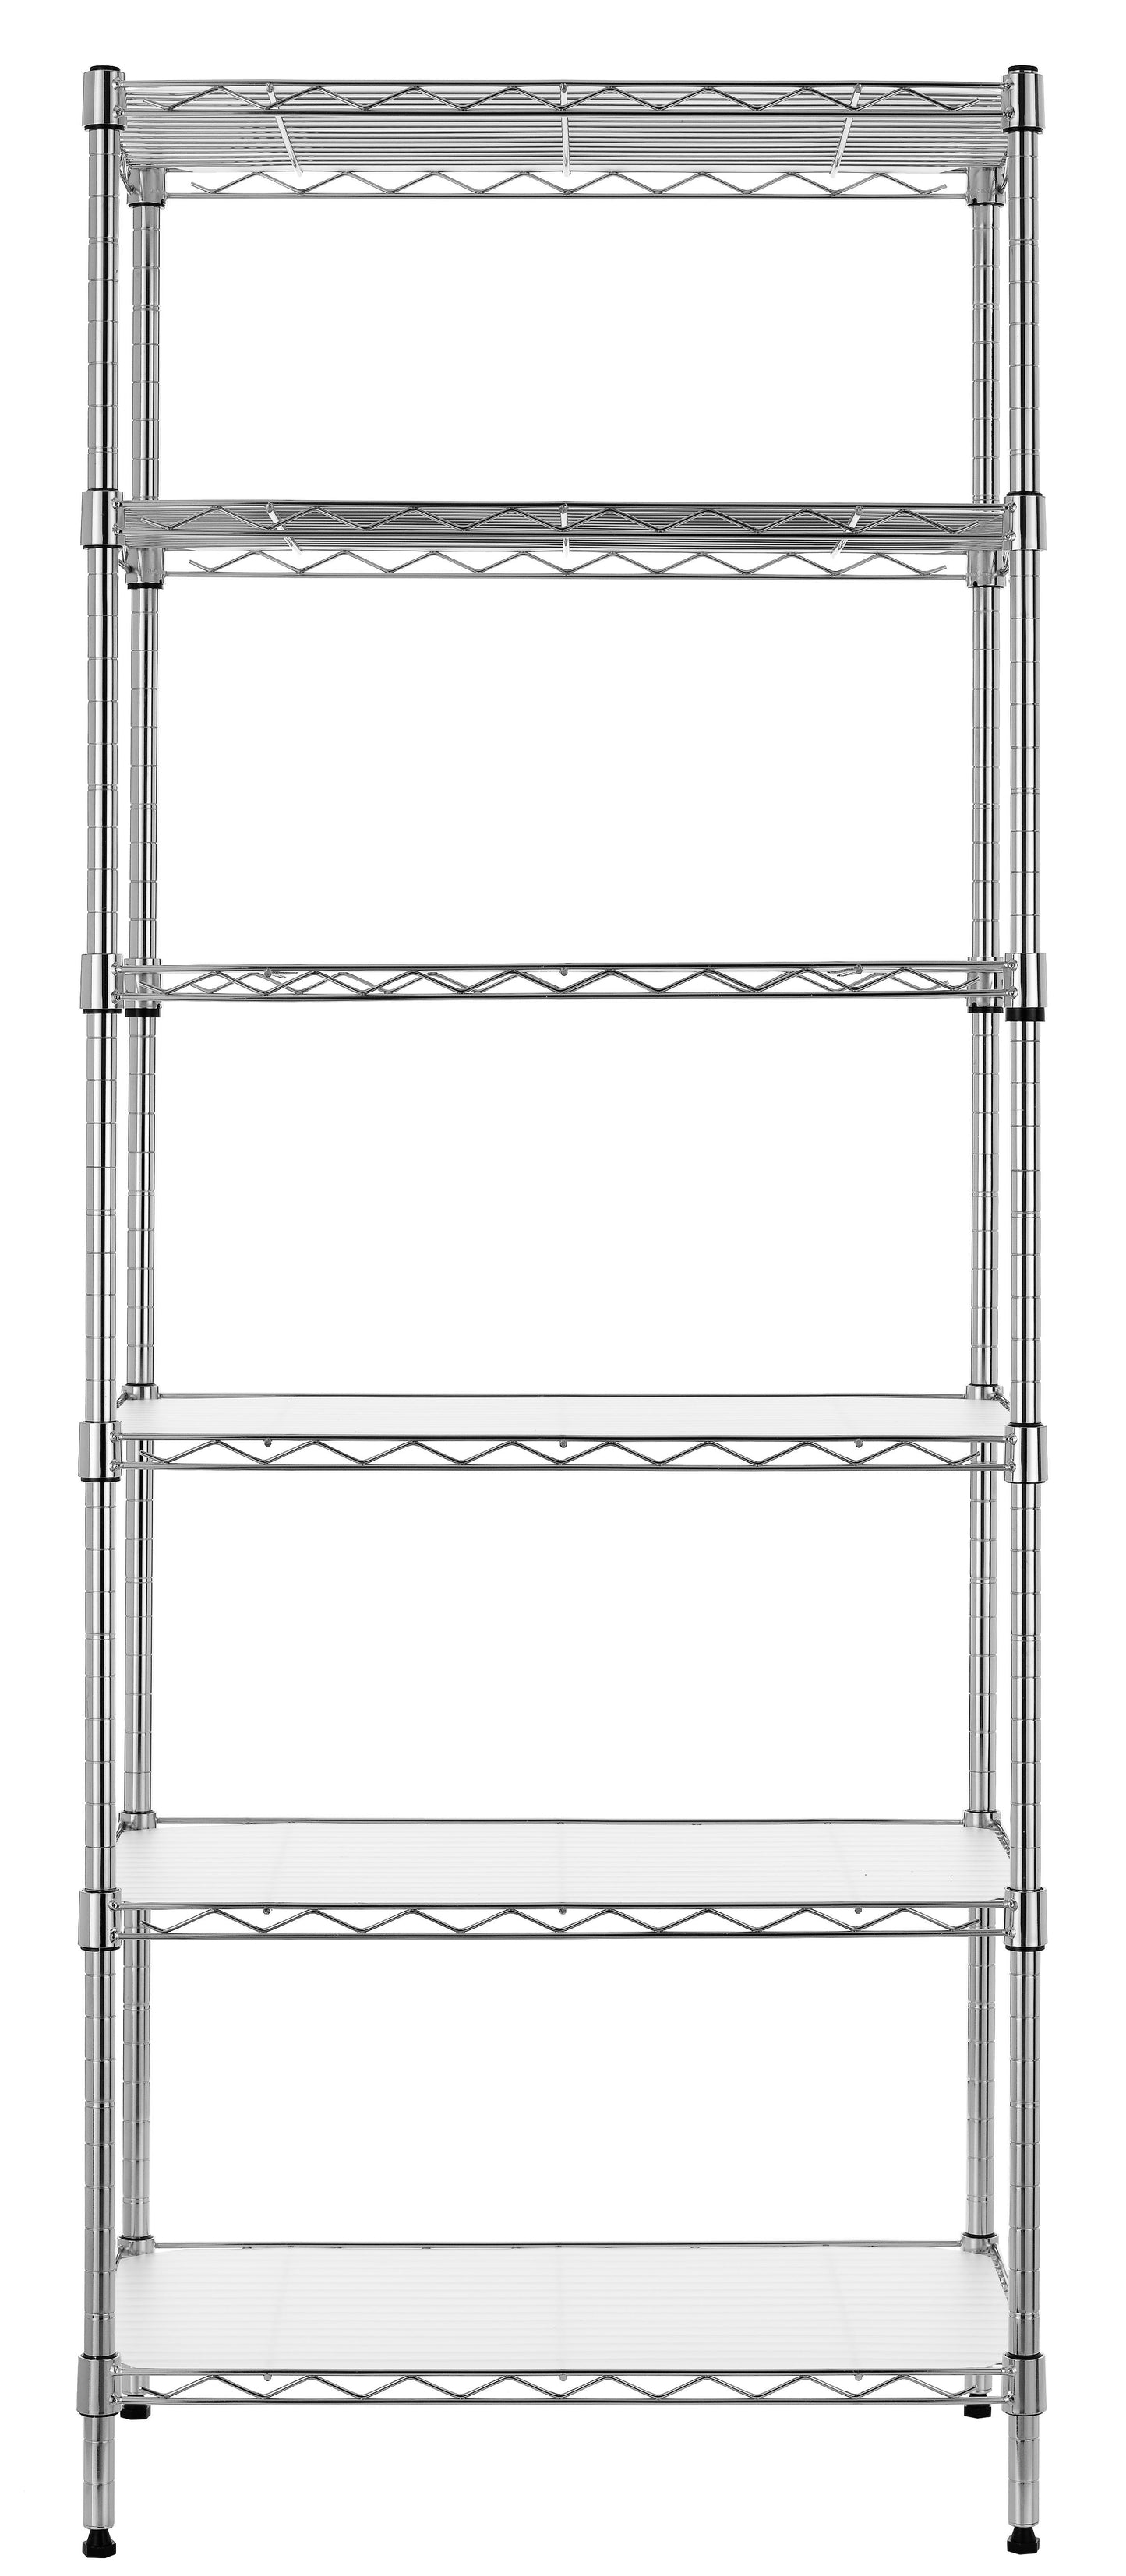 Finnhomy 6-Tier Wire Shelving Unit Adjustable Steel Wire Rack Shelving 6 Shelves Steel Storage Rack or Two 3 Tier Shelving Units with PE mat and Stable Leveling Feet, NSF Certified, Chrome